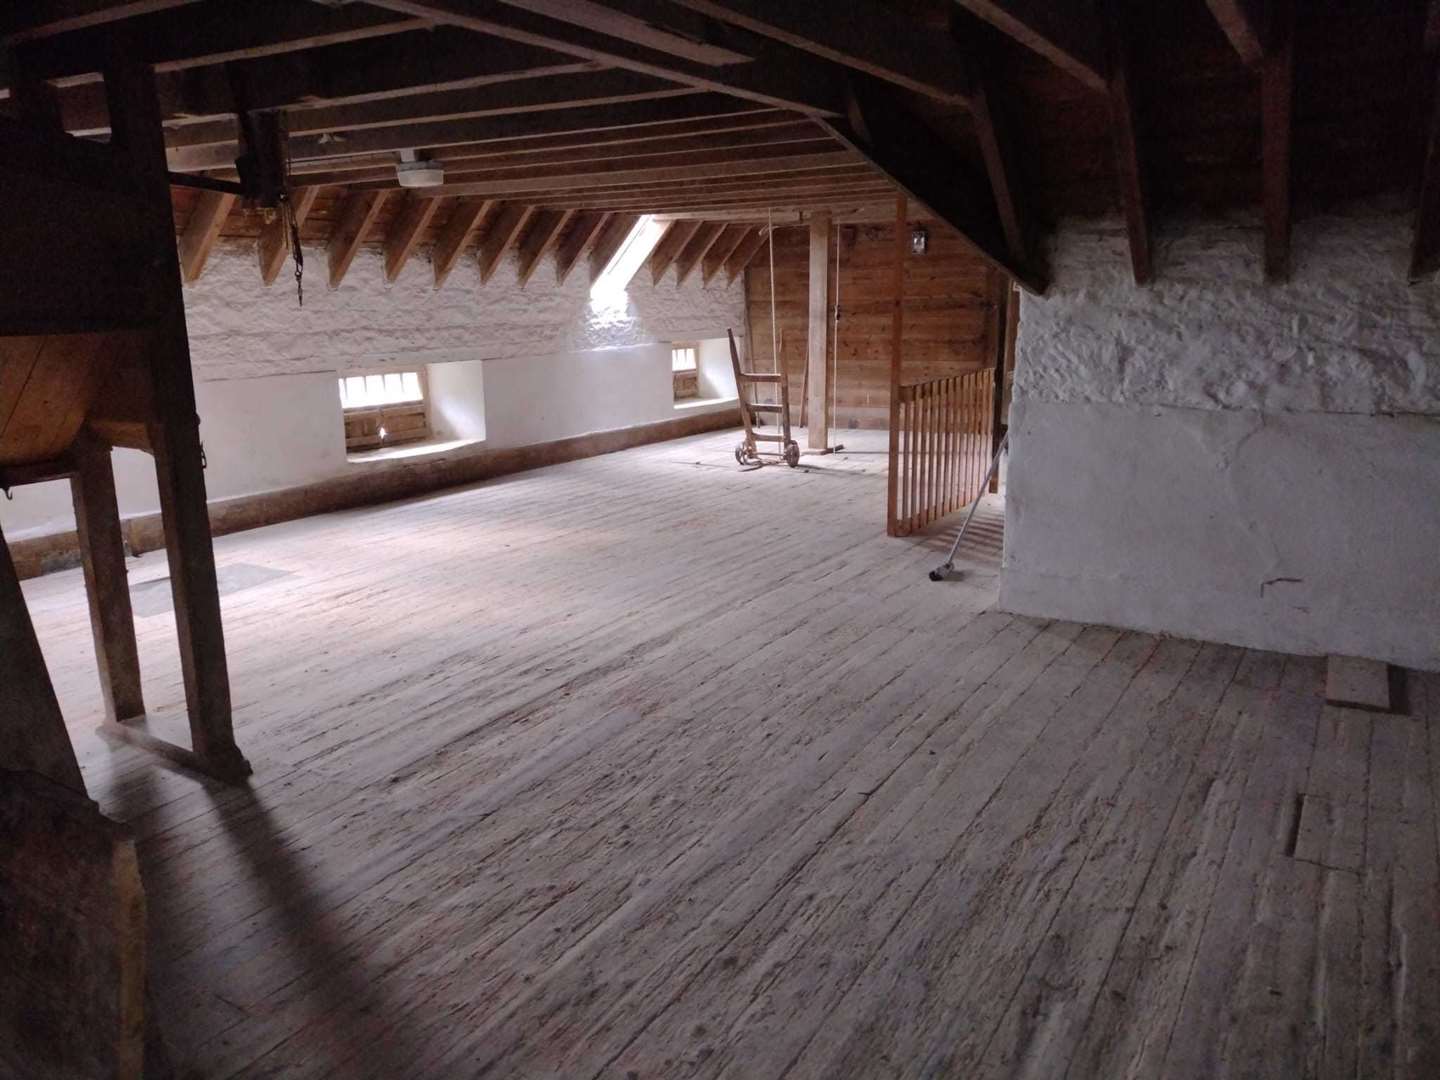 The spacious interior of Golspie Mill.